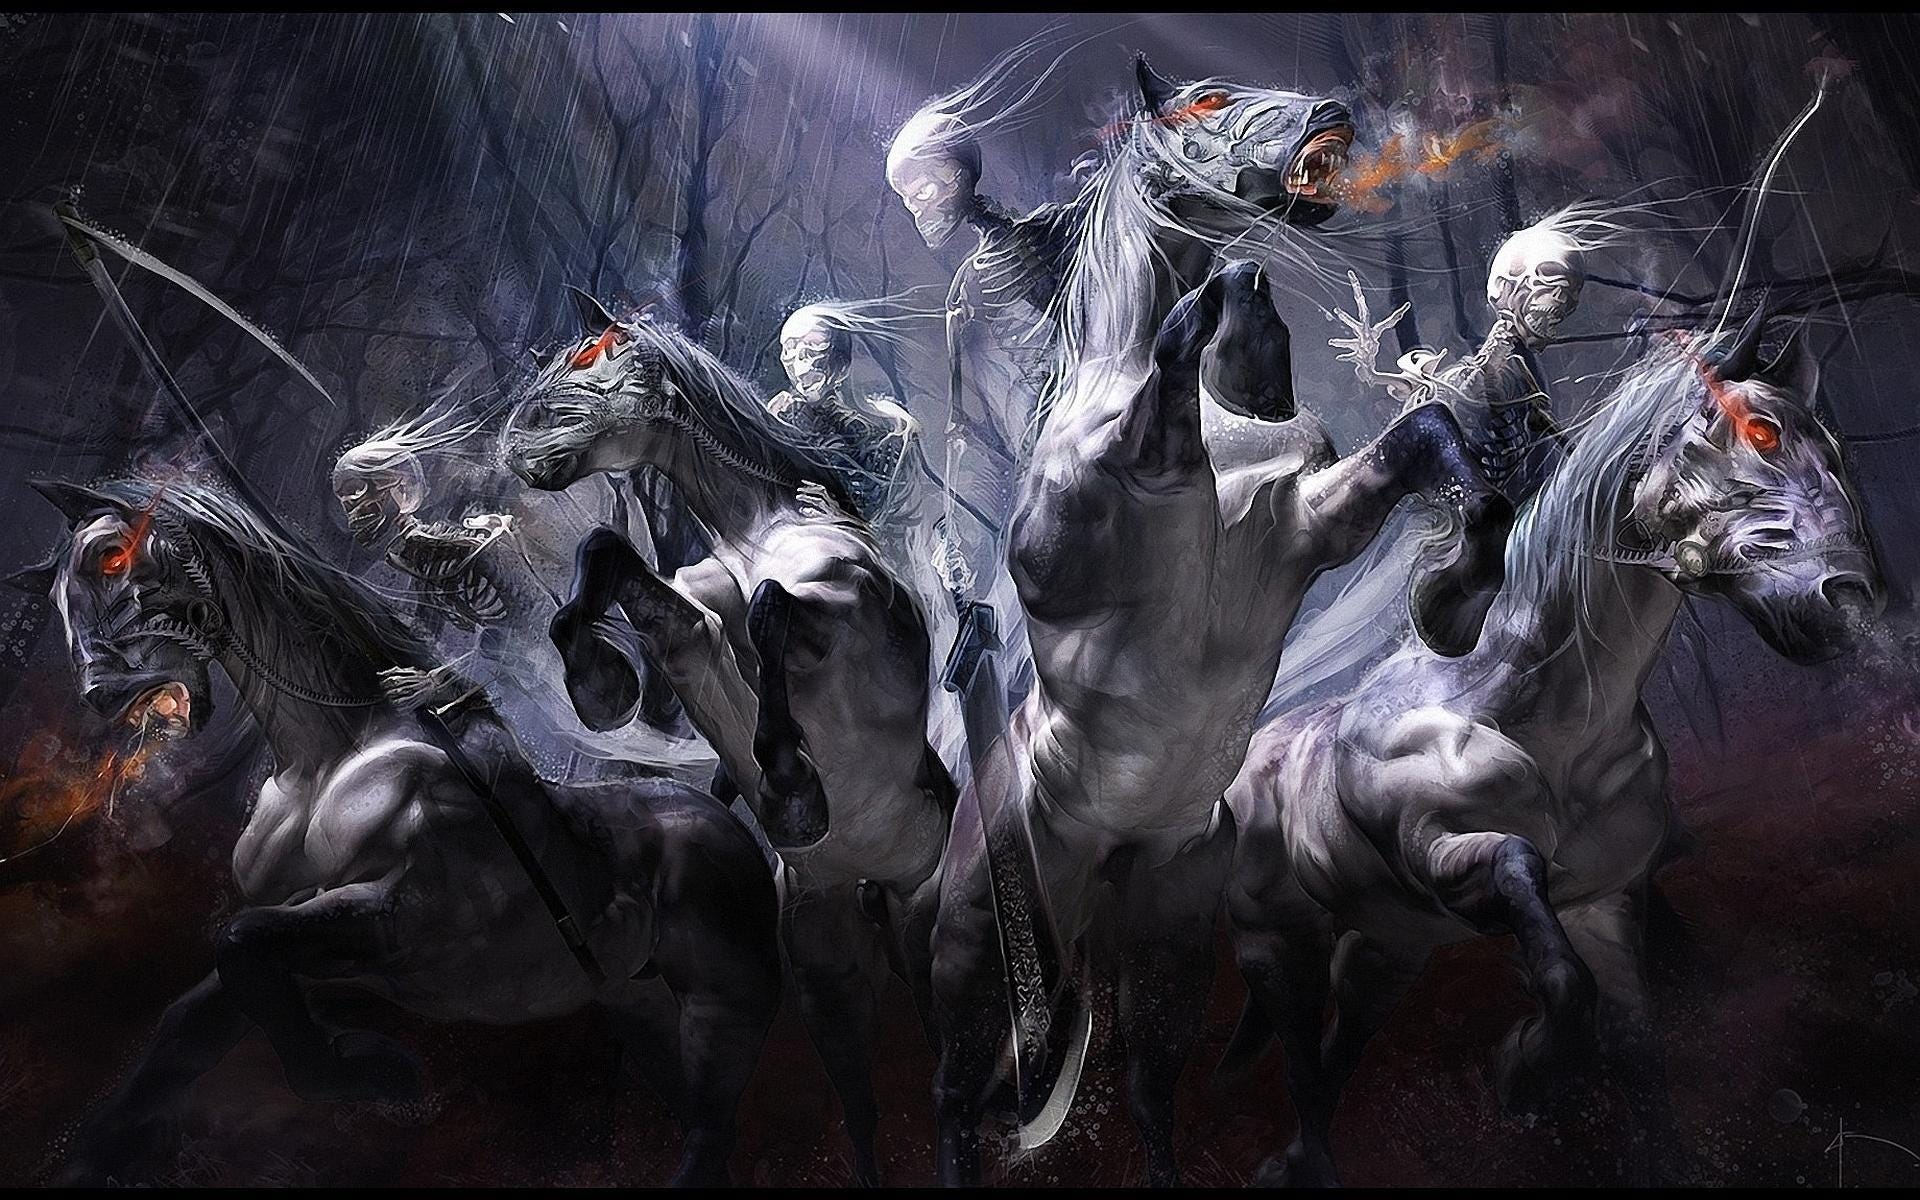 7. Tattoo Designs Inspired by the Four Horsemen of the Apocalypse in Revelation 6:8 - wide 7